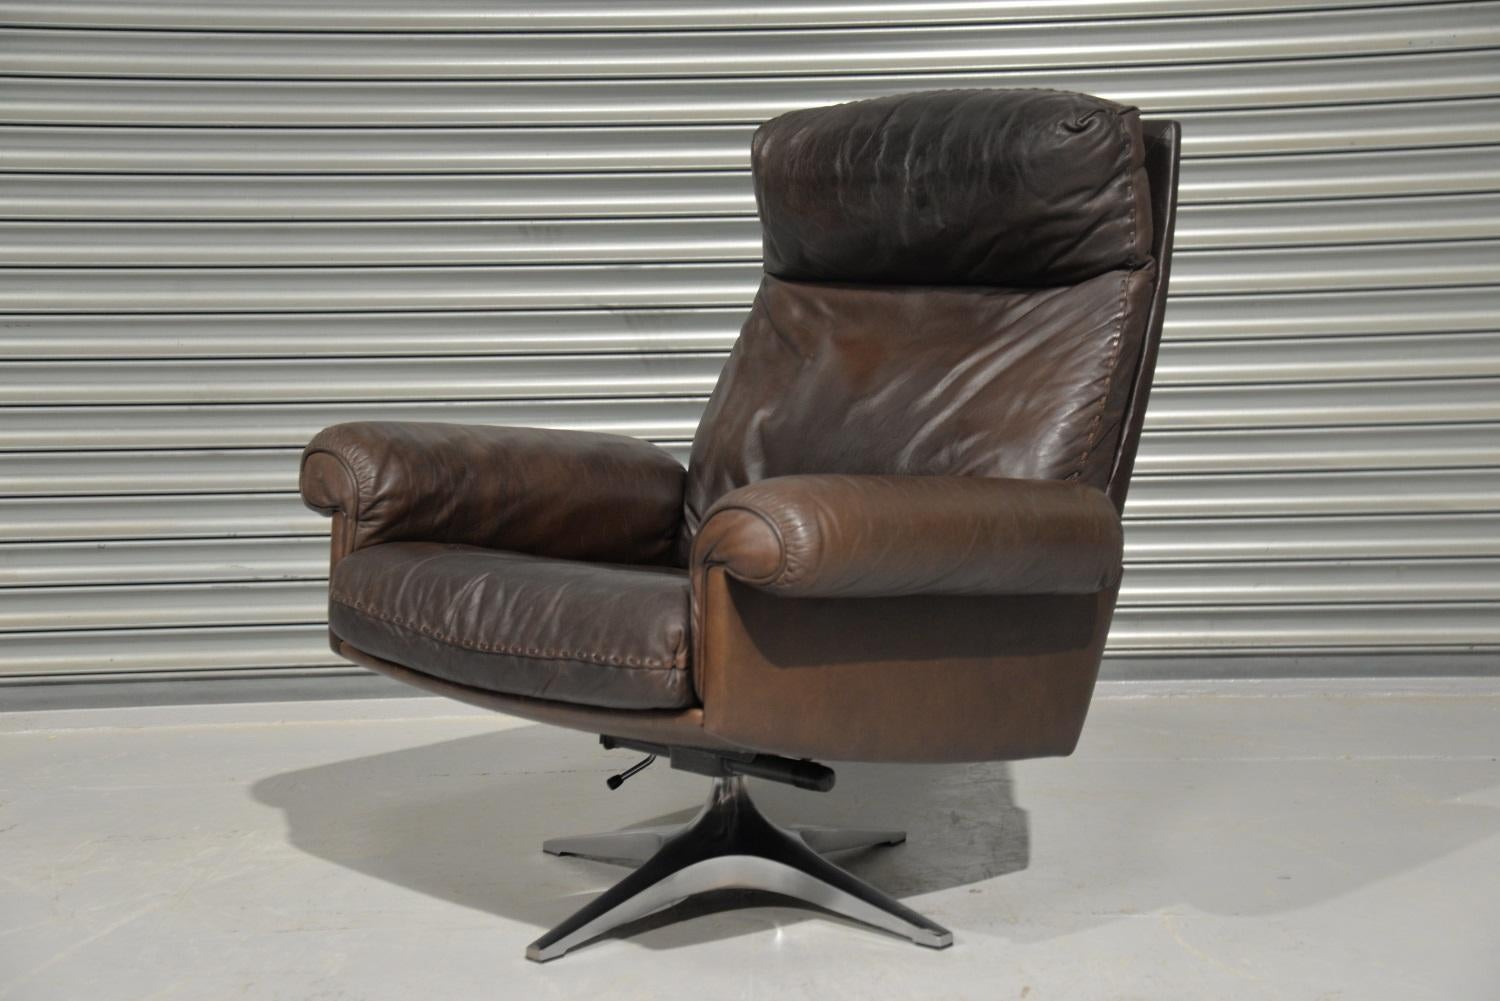 We are delighted to bring to you a highly desirable and rarely available vintage 1970s De Sede DS 31 high back swivel armchair. Hand built in the 1970s by De Sede craftsman in Switzerland. The armchair stands on a polished swivel chrome plated metal